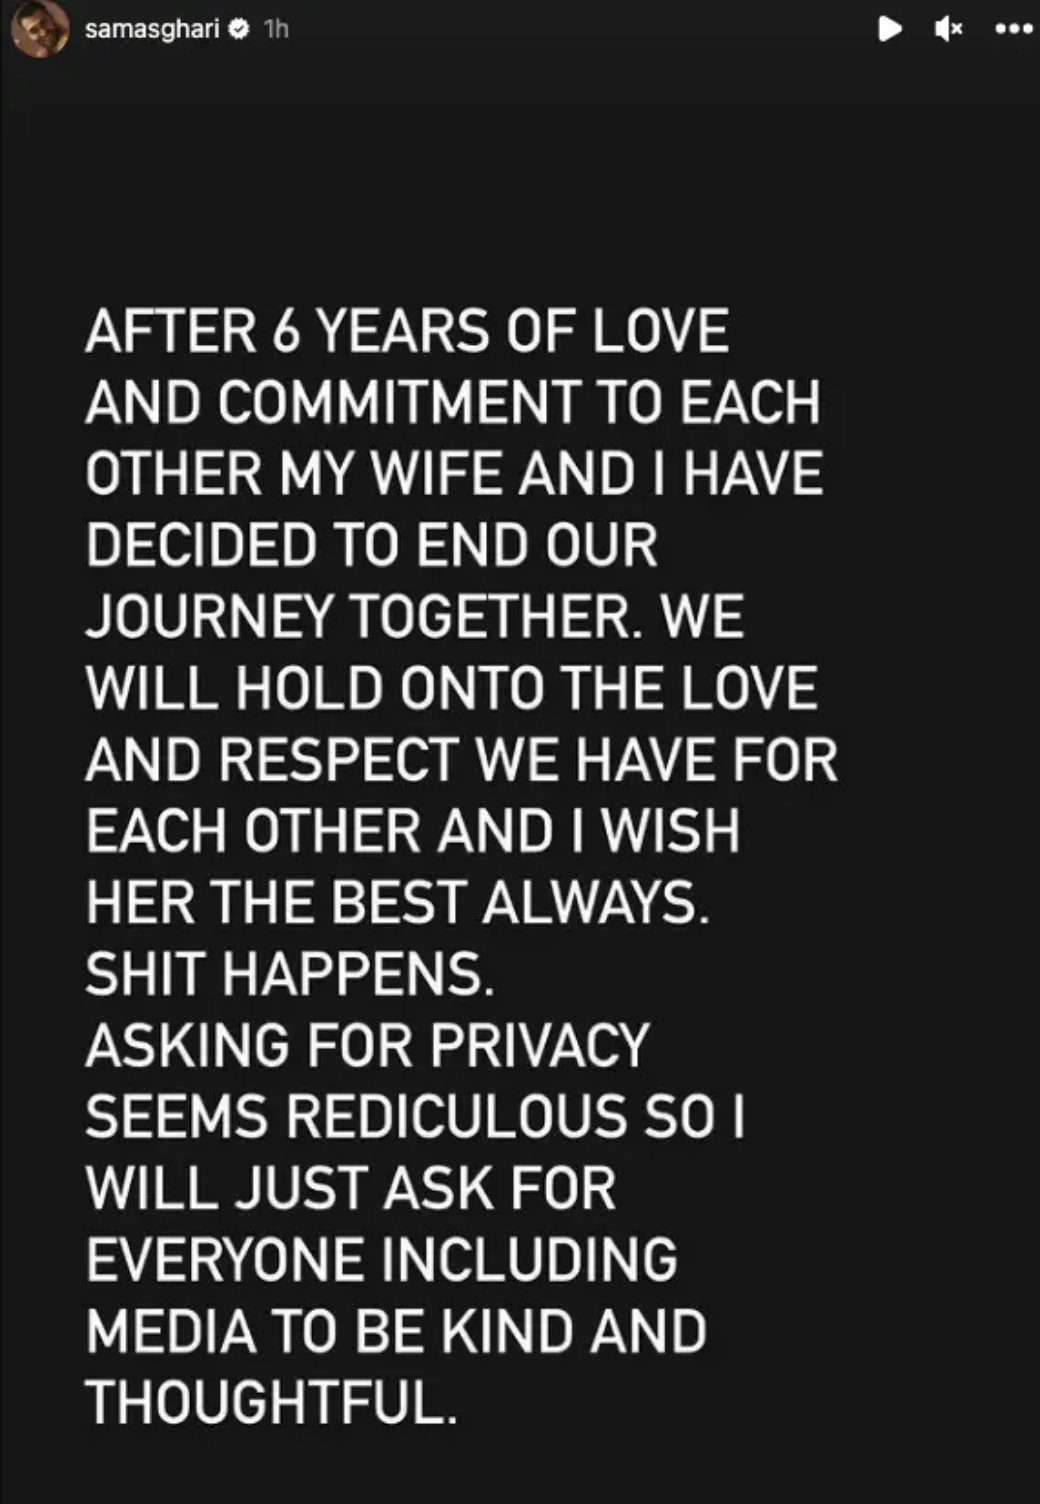 Screenshot of Sam&#x27;s IG story statement, saying &quot;After 6 years of love and commitment to each other my wife and I have decided to end our journey together&quot;